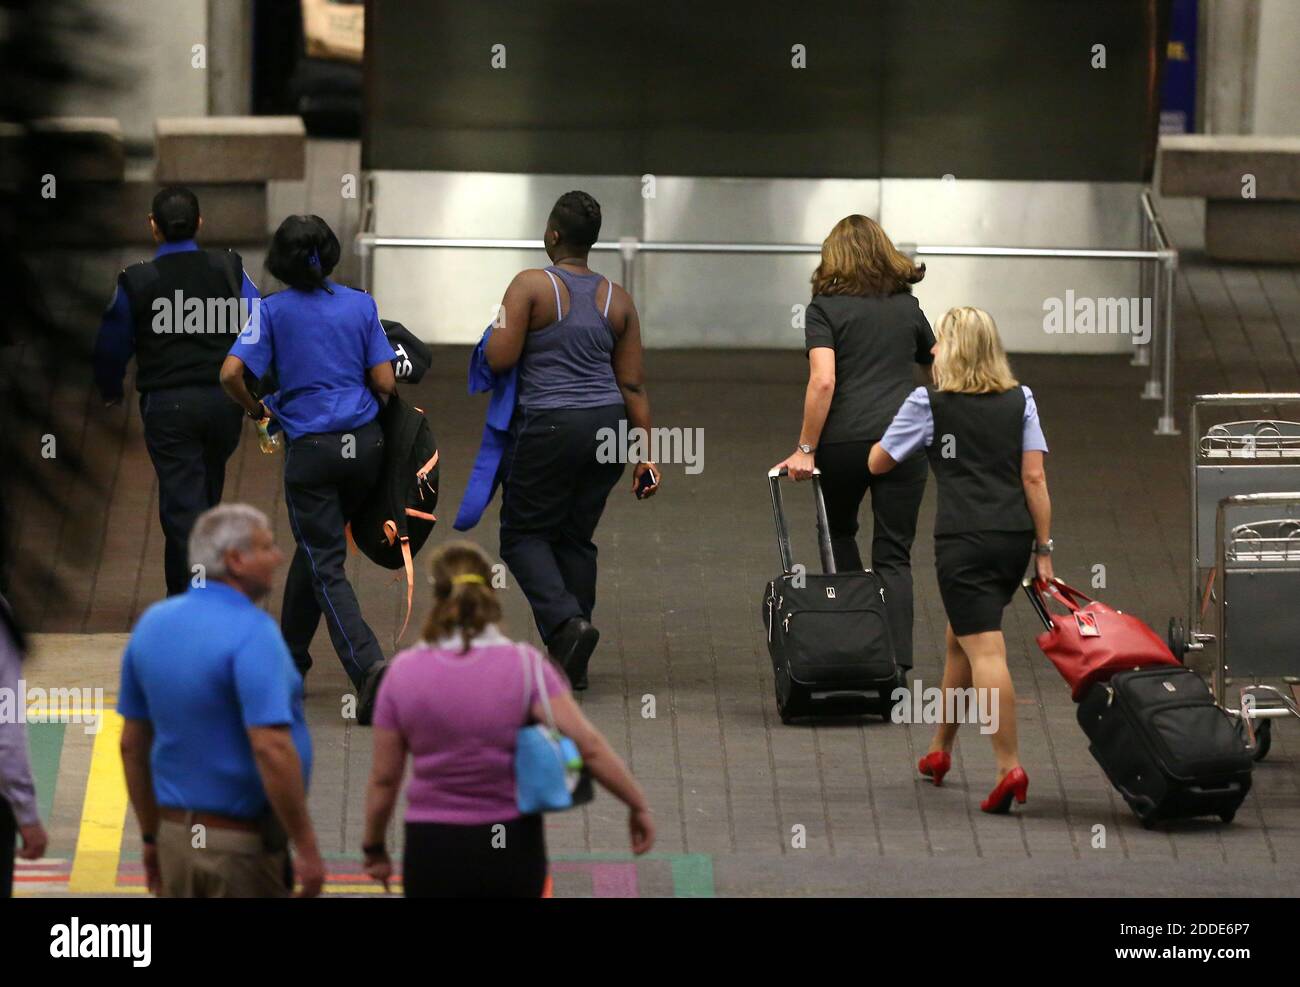 NO FILM, NO VIDEO, NO TV, NO DOCUMENTARY - Employees and pasengers walk into the parking garage at Fort Lauderdale-Hollywood International Airport on Friday, Jan. 6, 2017, in Fort Lauderdale, Fla. (David Santiago/El Nuevo Herald/TNS) Stock Photo